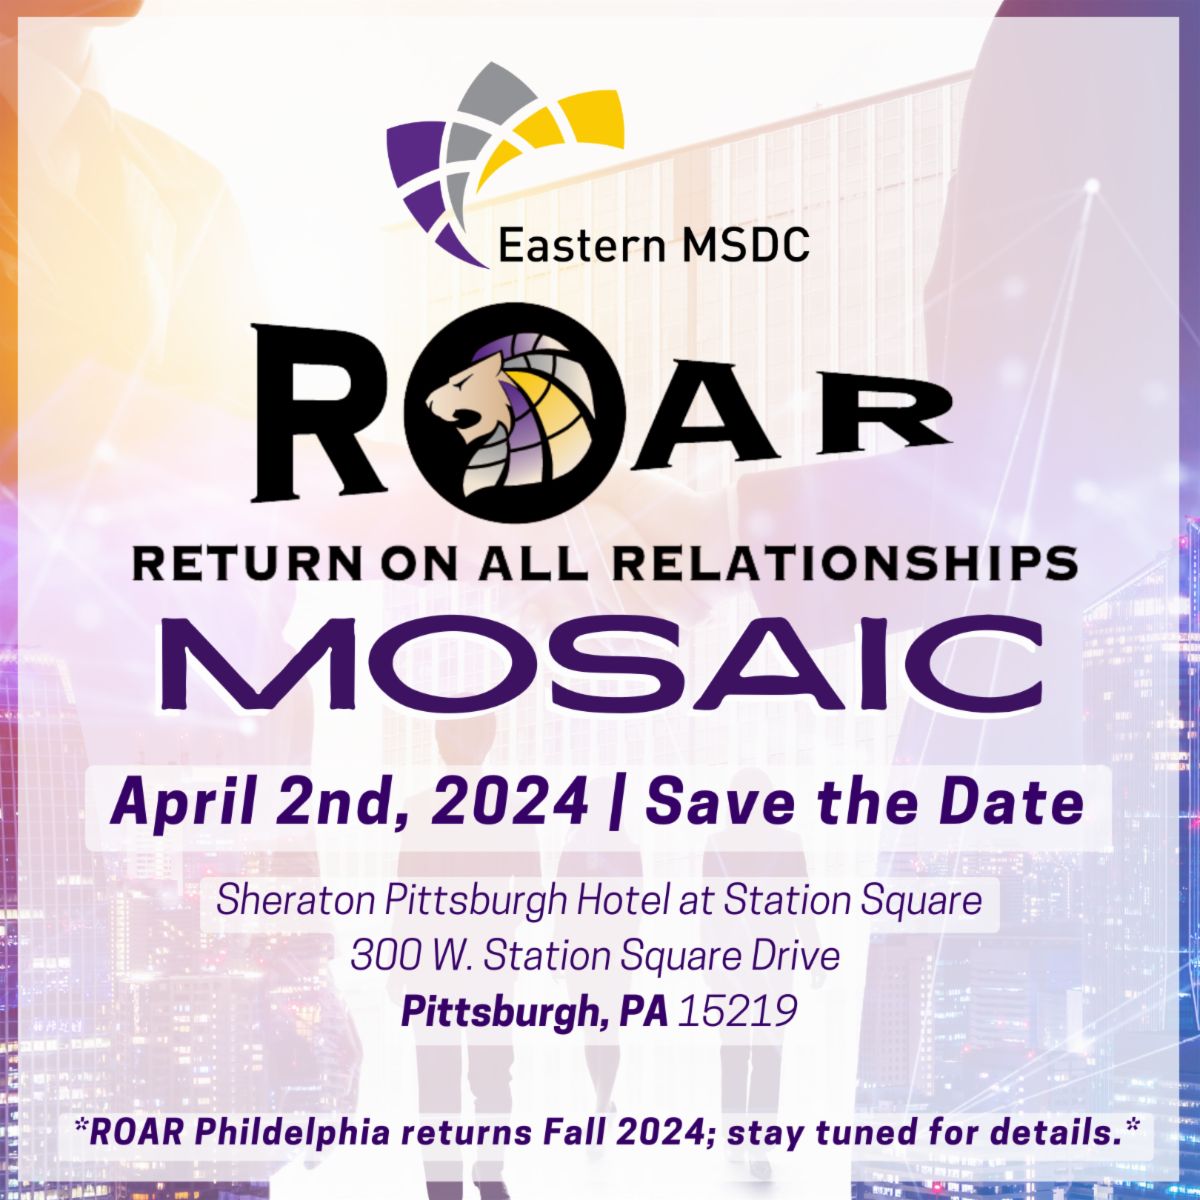 🌟 Save the Date for ROAR Pittsburgh! 🌟 🗓️ When: Tuesday, April 2, 2024 📍 Where: Sheraton Station Square, 300 W Station Square Dr, Pittsburgh, PA 15219 Registration opens soon! Stay tuned for additional details! ✨ #EMSDCROAR #ROARConference #ReturnOnAllRelationships